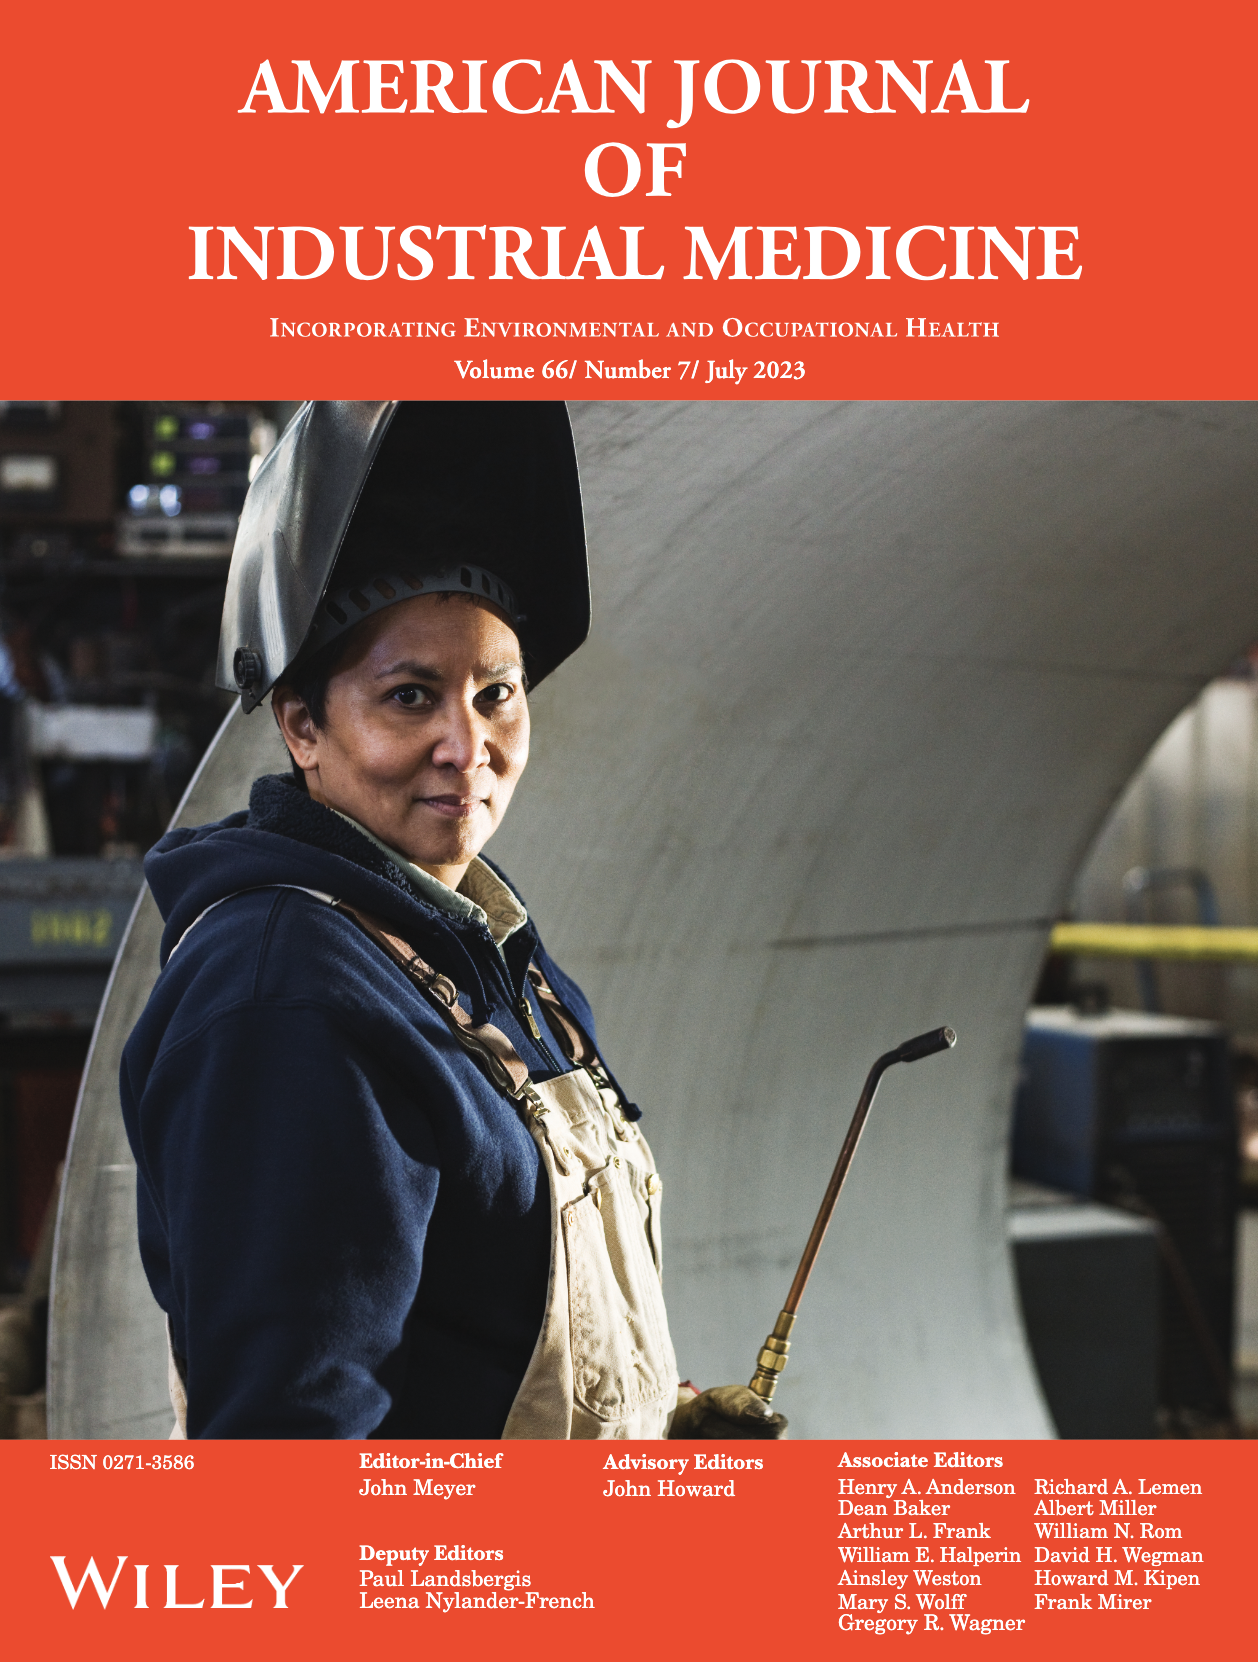 Cover of the America Journal of Industrial Medicine. Image shows woman working smiling and wearing overalls while holding an industrial sprayer in her hand.